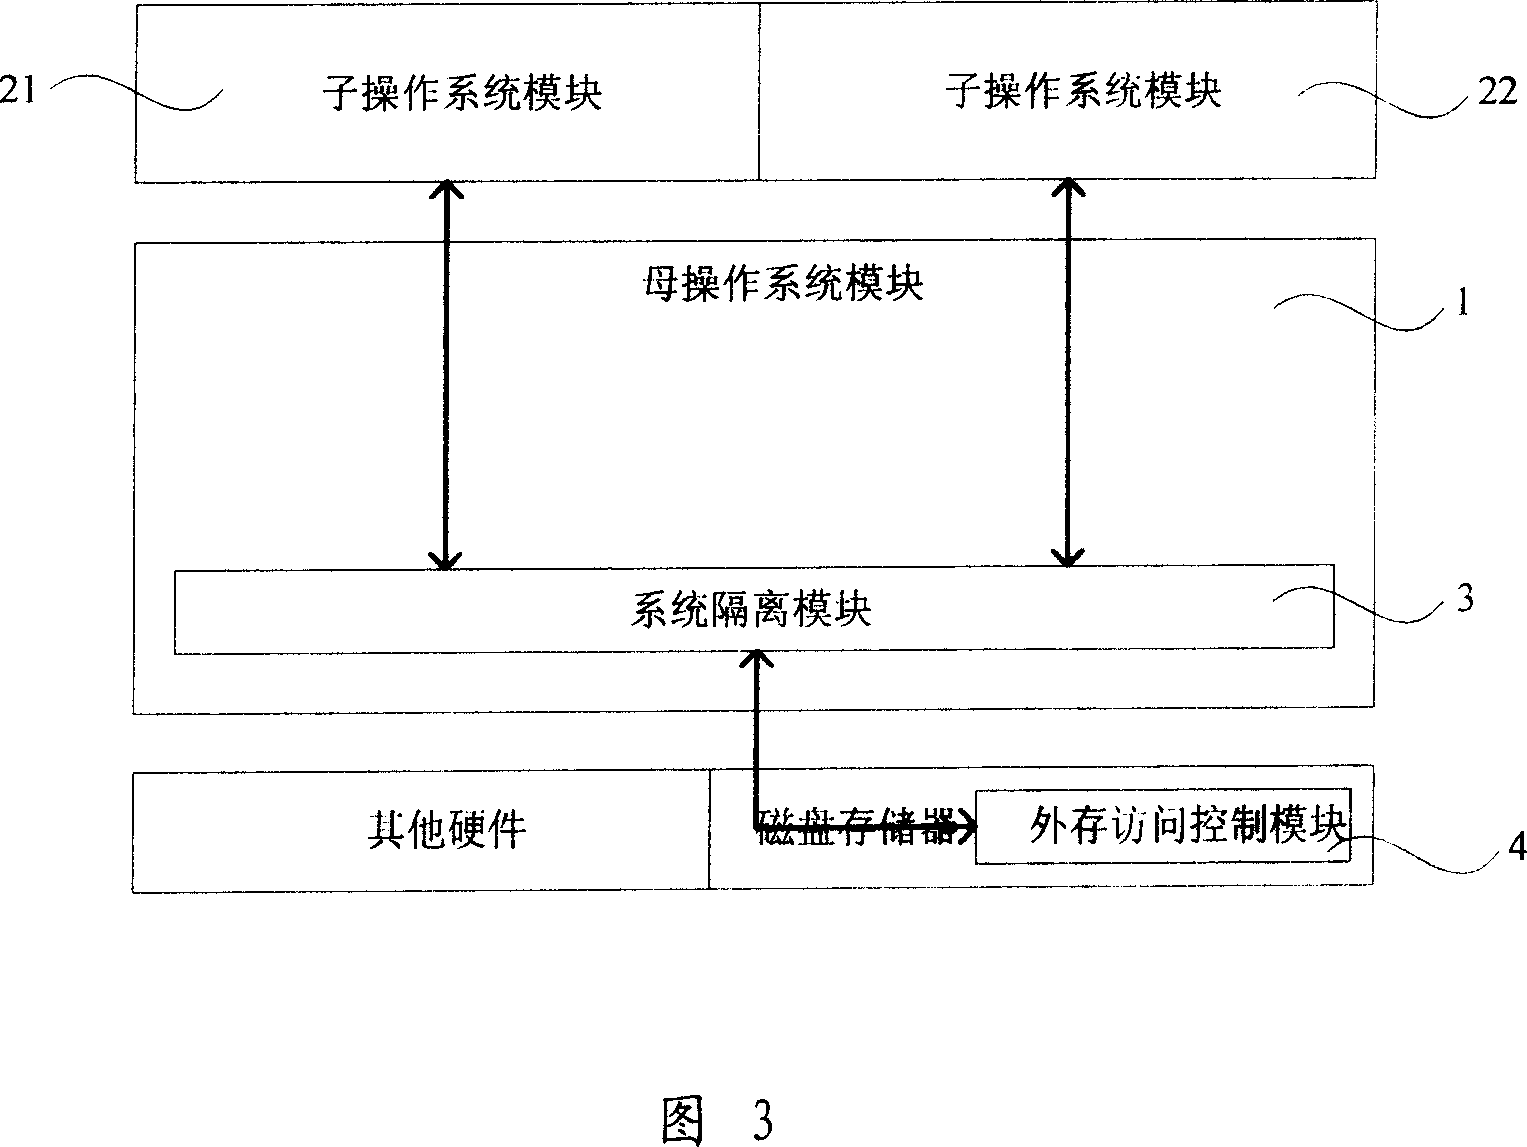 System and method for implementing operation system separation